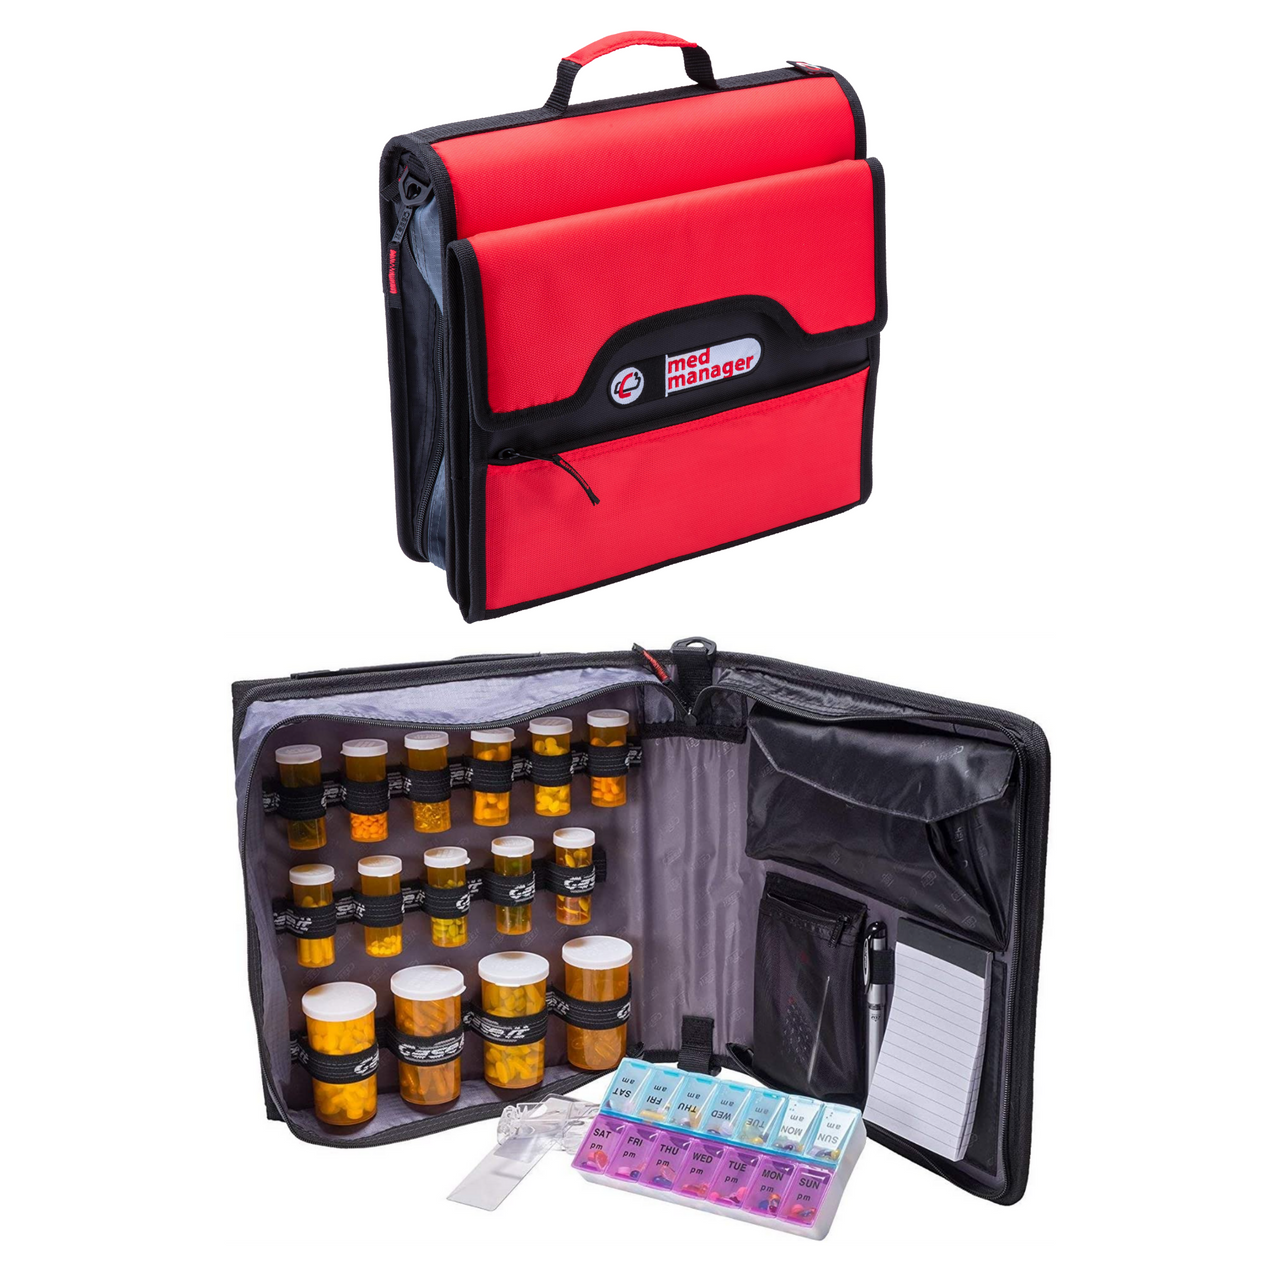 Med Manager Deluxe Medicine Organizer and Pill Case